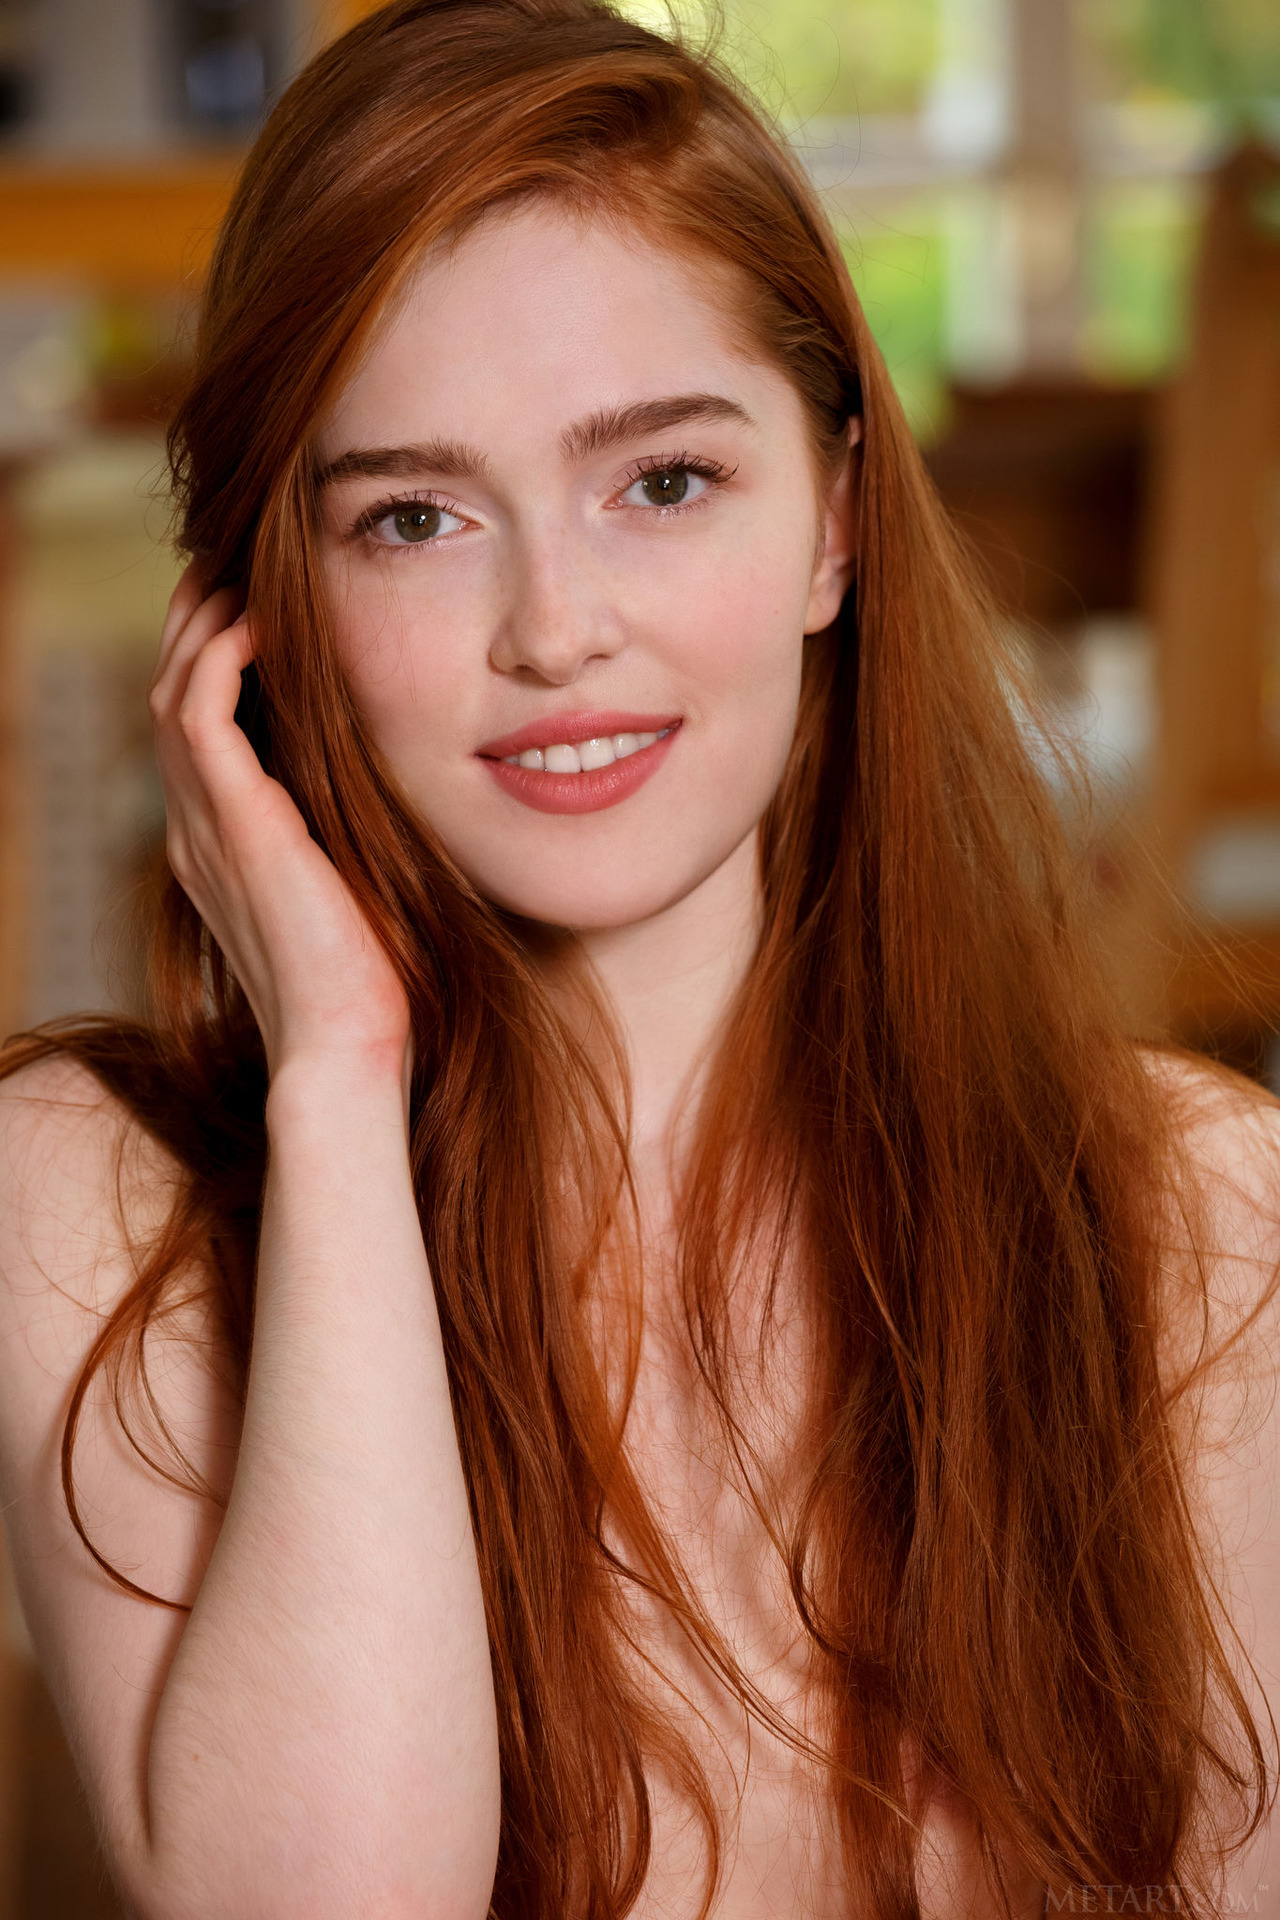 Stunning Redhead Jia Lissa Has Such A Sexy Aura, She Can't Help Making Your Heart Race With Her Gorgeous Smile 20